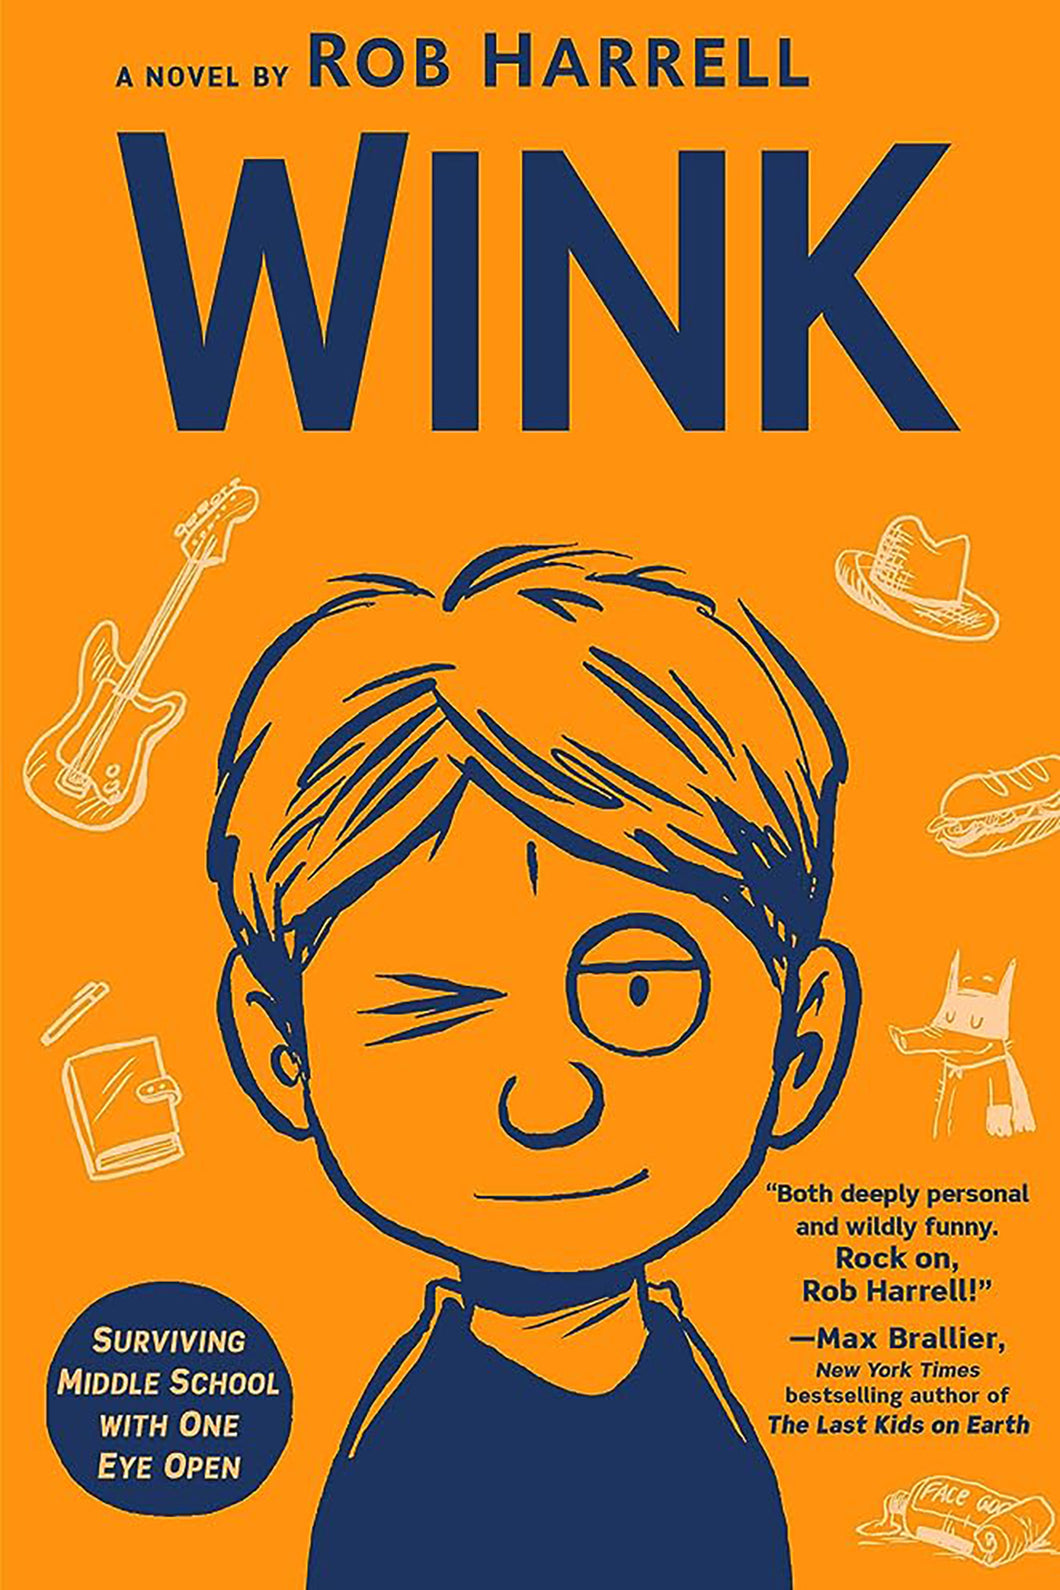 Wink by Rob Harrell / Hardcover or Paperback - NEW BOOK